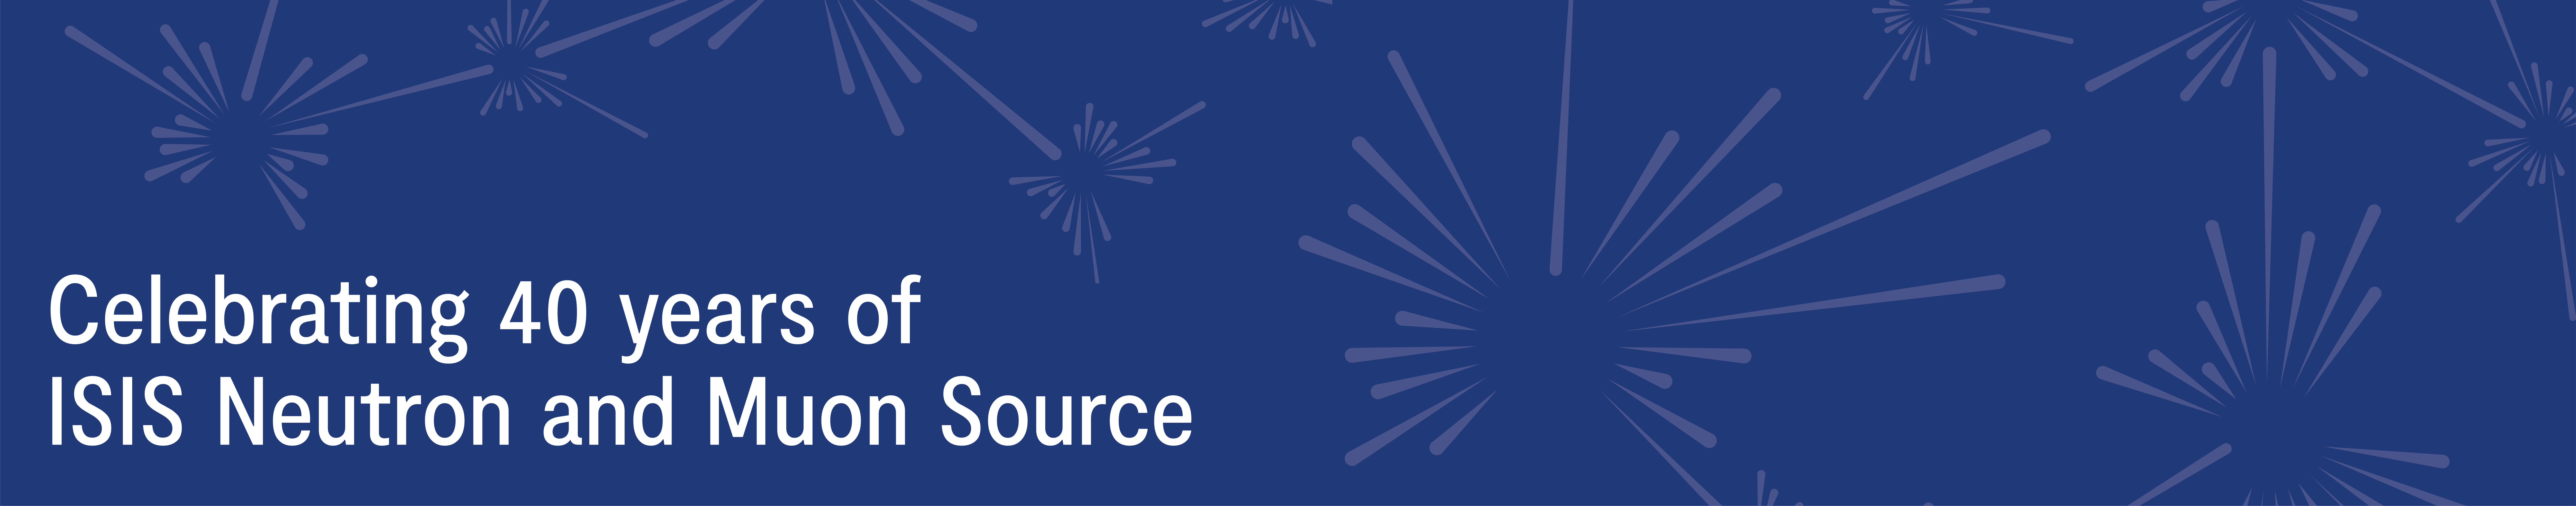 Dark blue banner with a firework pattern and text reading Celebrating 40 years of ISIS Neutron and Muon Source